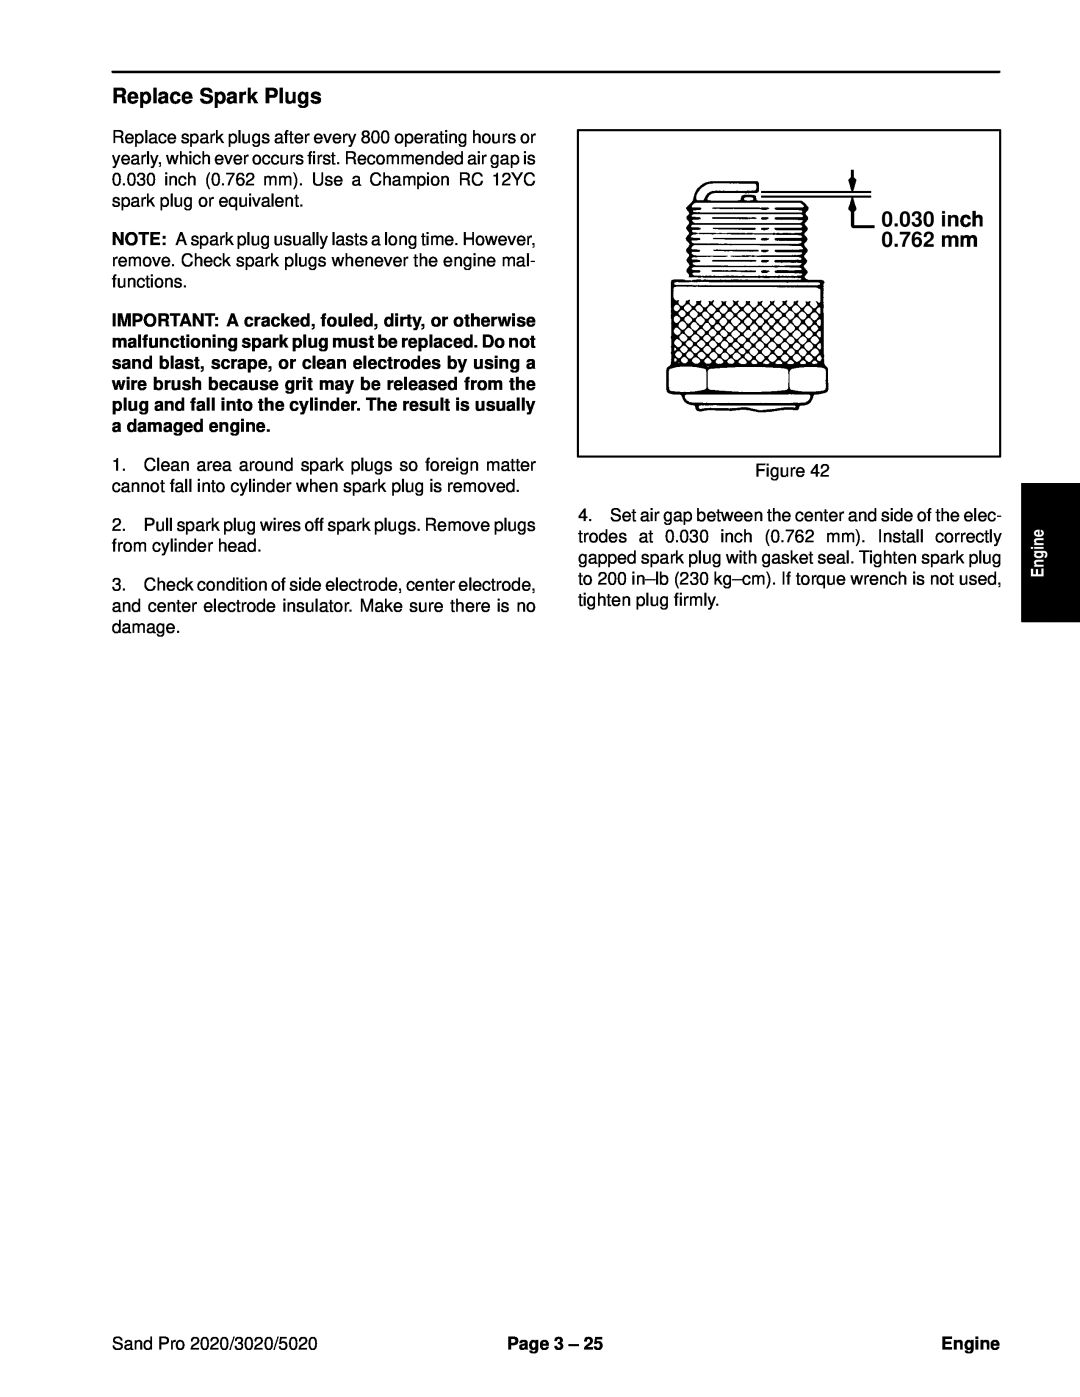 Toro service manual Replace Spark Plugs, inch 0.762 mm, Sand Pro 2020/3020/5020, Page 3, Engine 